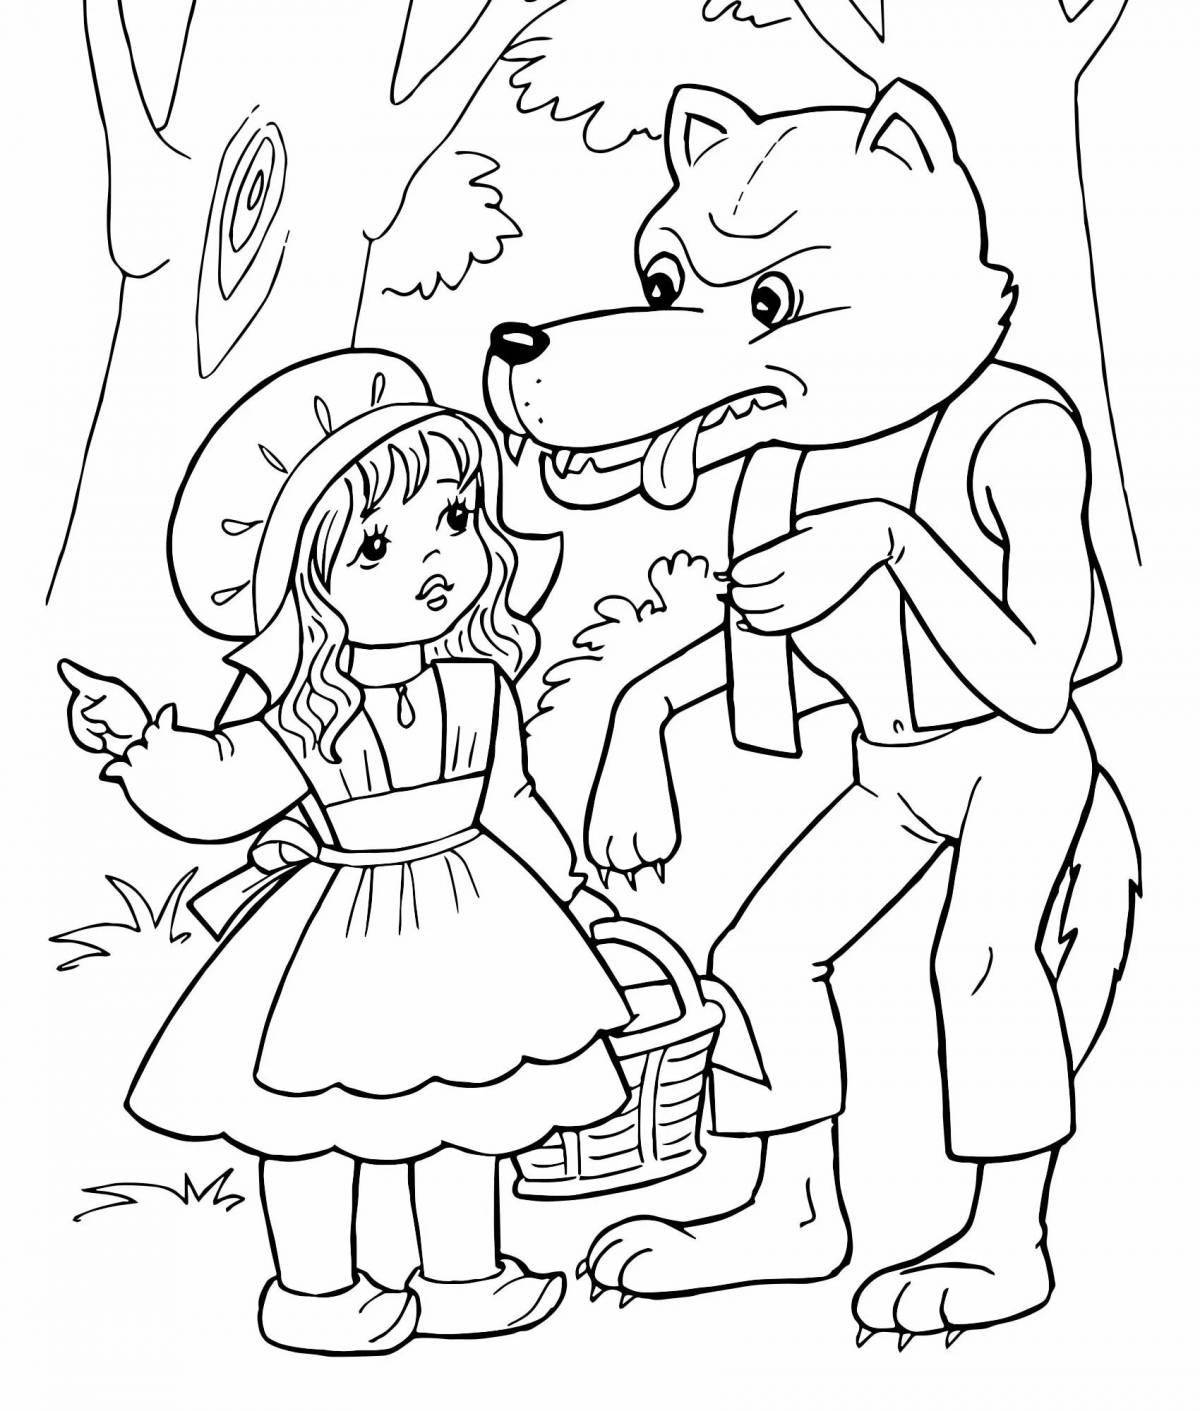 Adorable wolf and little red riding hood coloring book